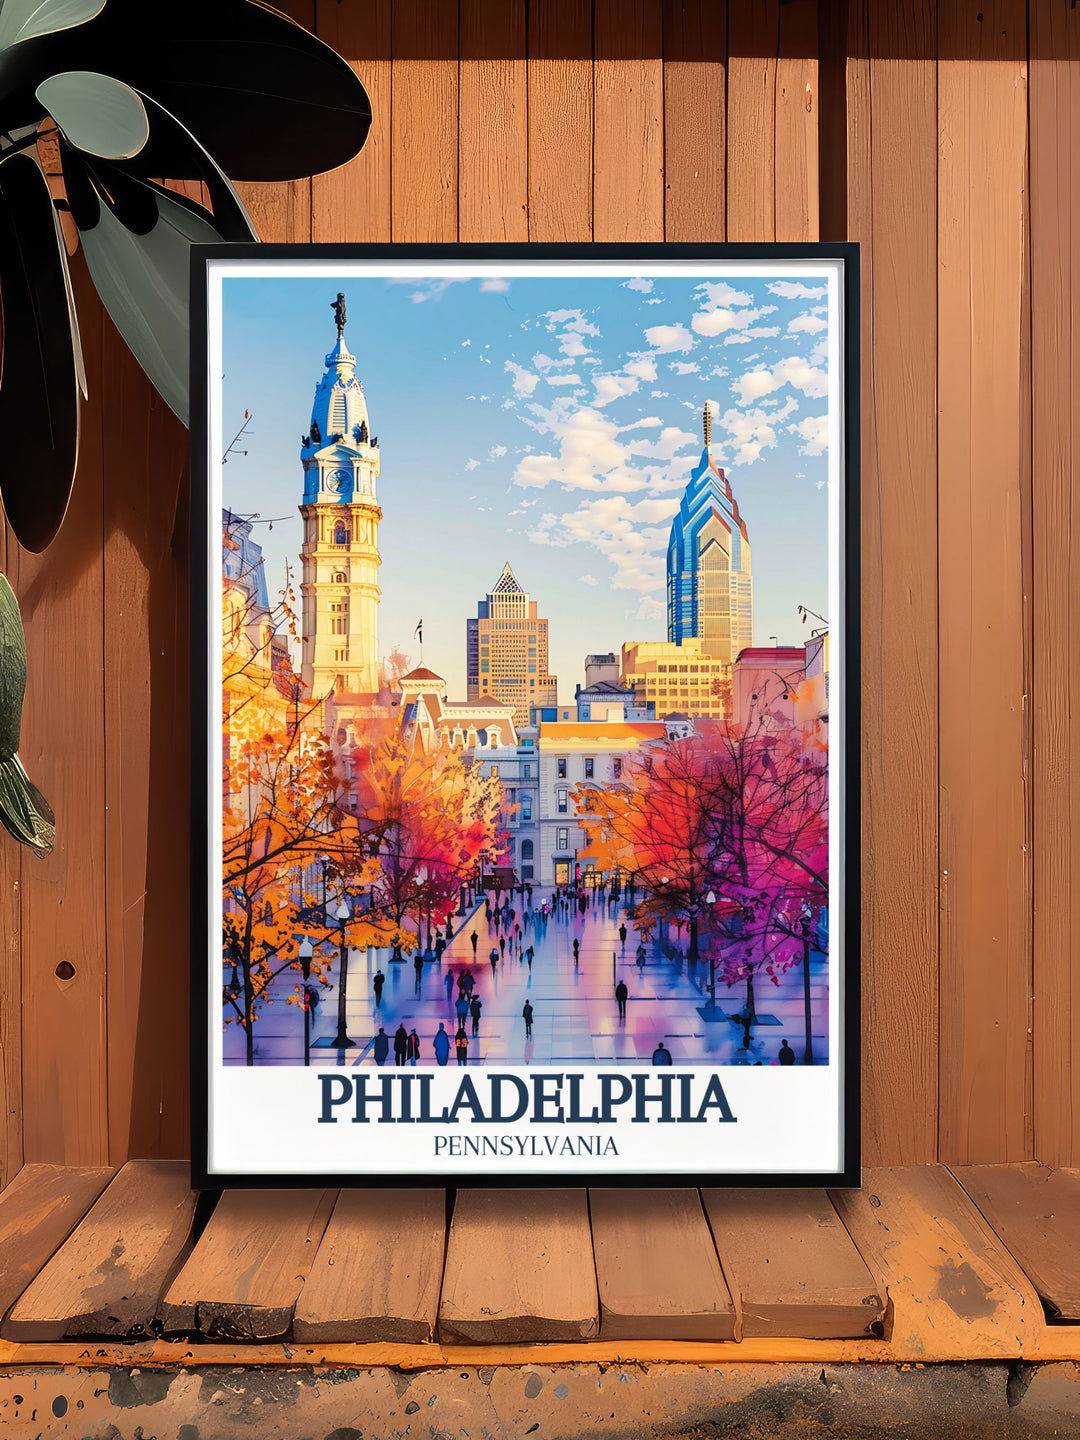 Beautiful Philadelphia artwork depicting Independence National Historical Park Franklin Institute and City Hall perfect for enhancing your home decor with a touch of history and sophistication